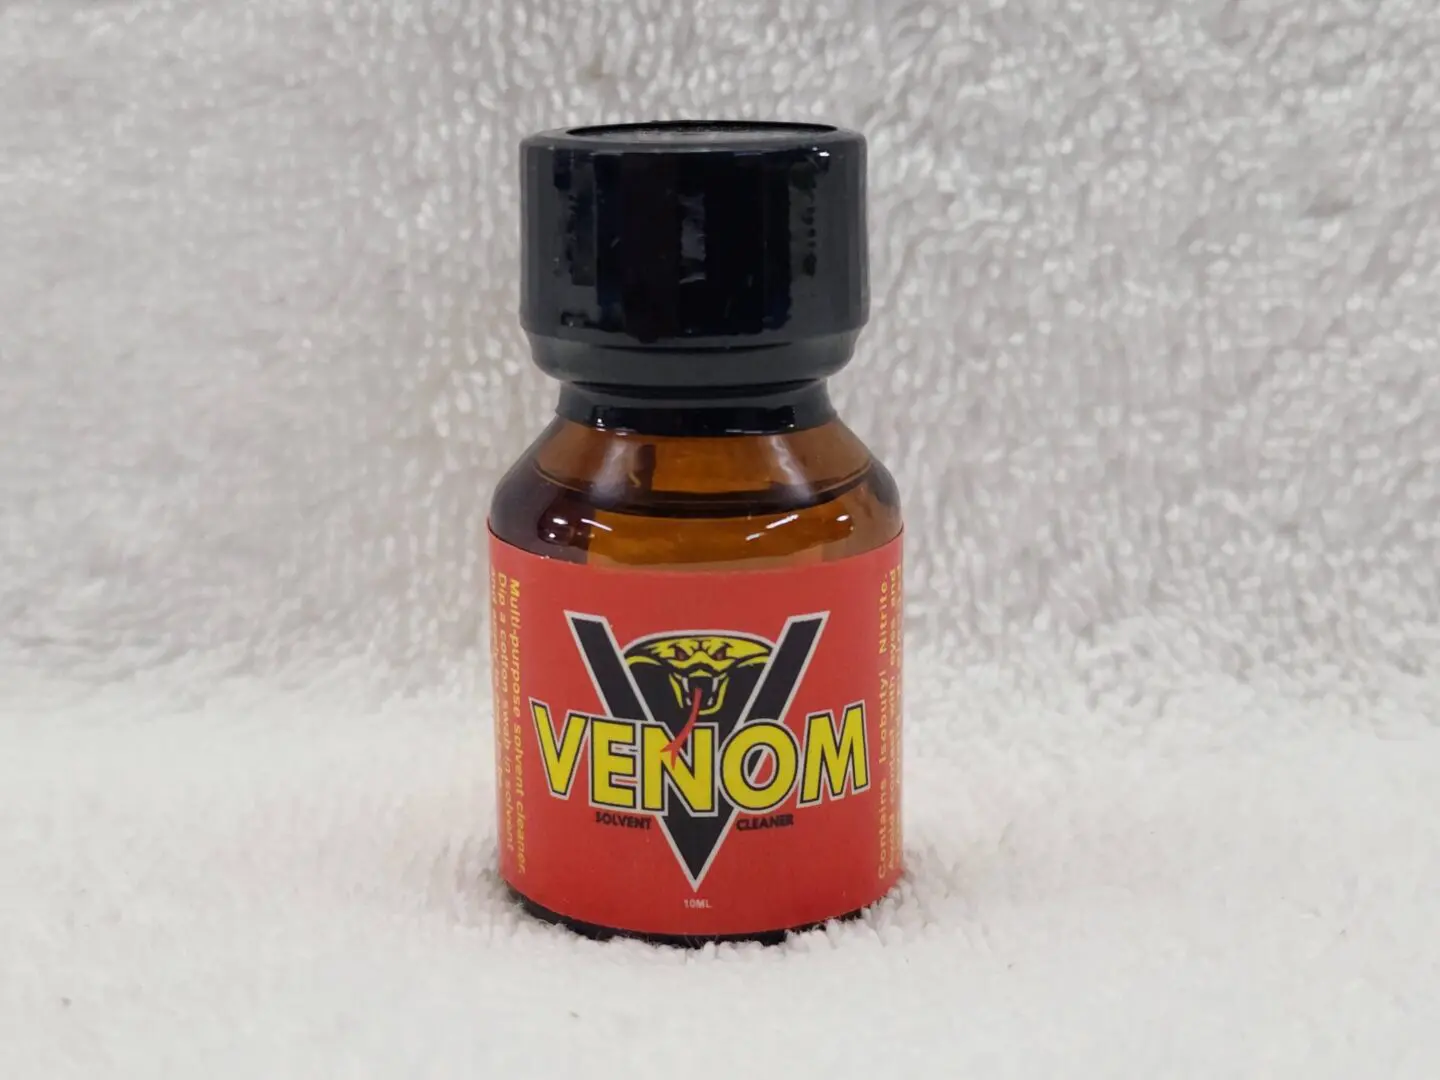 A bottle of venom poppers on the floor